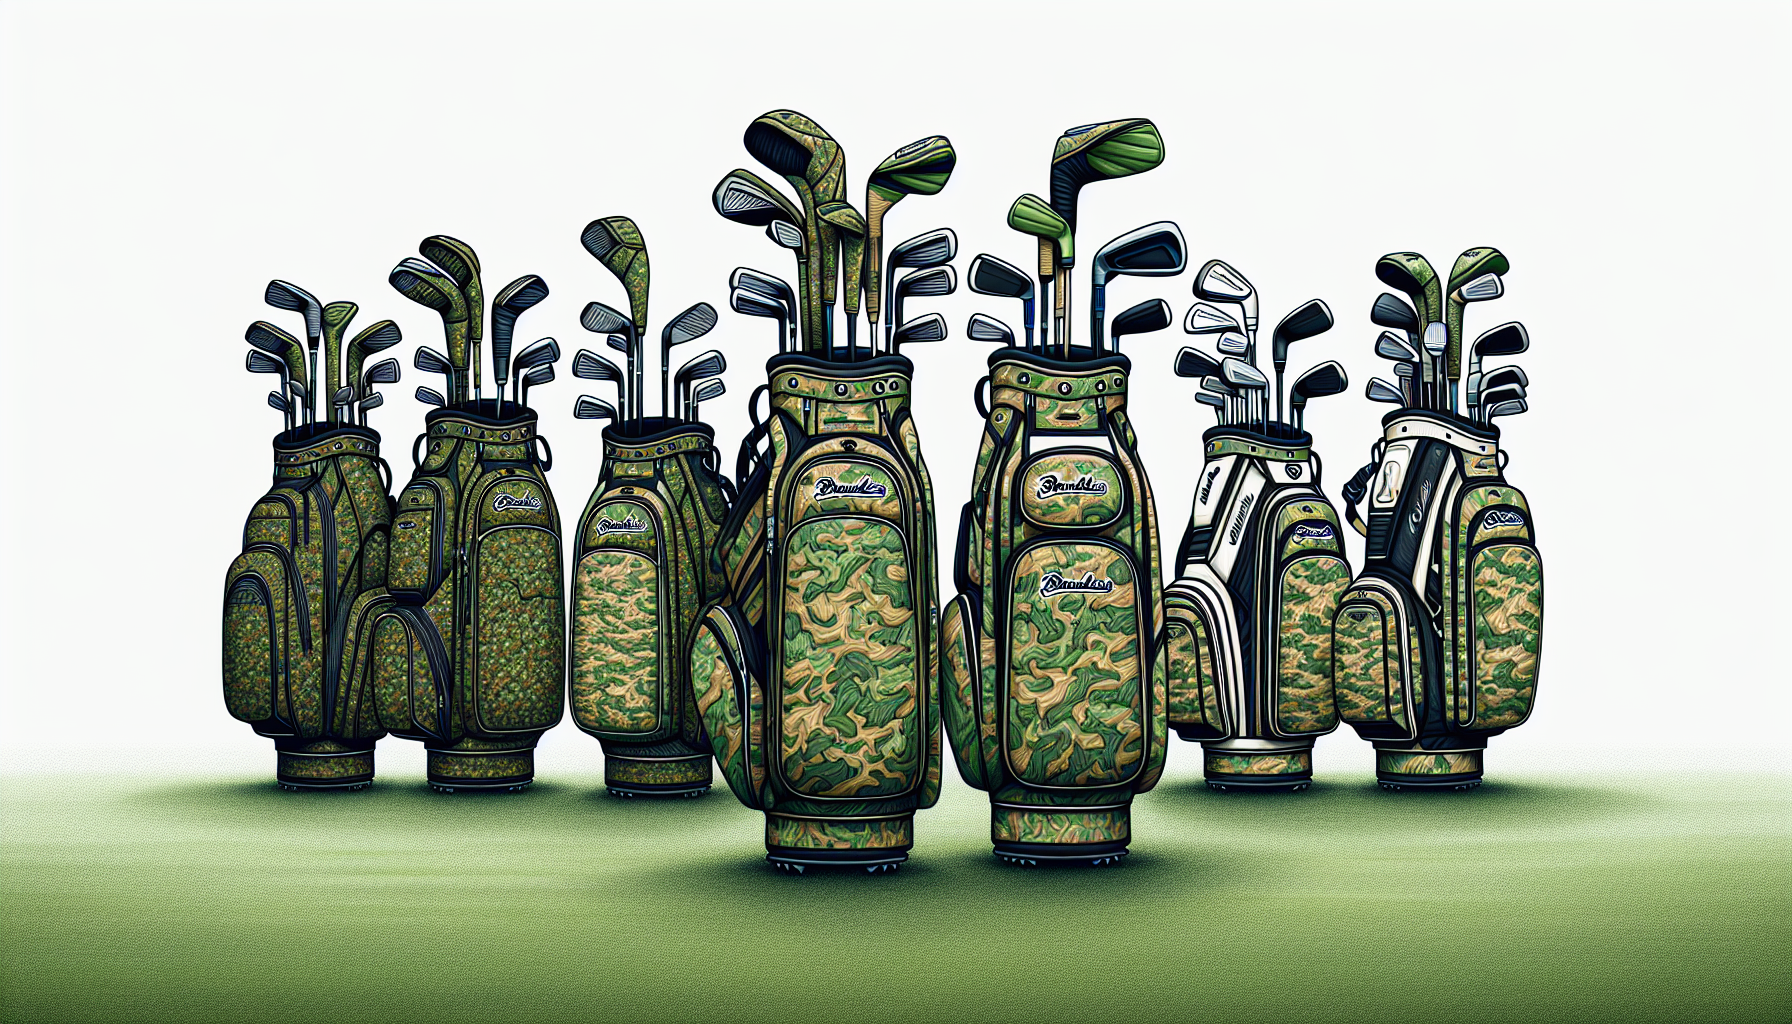 Illustration of a variety of camo golf bags from different brands